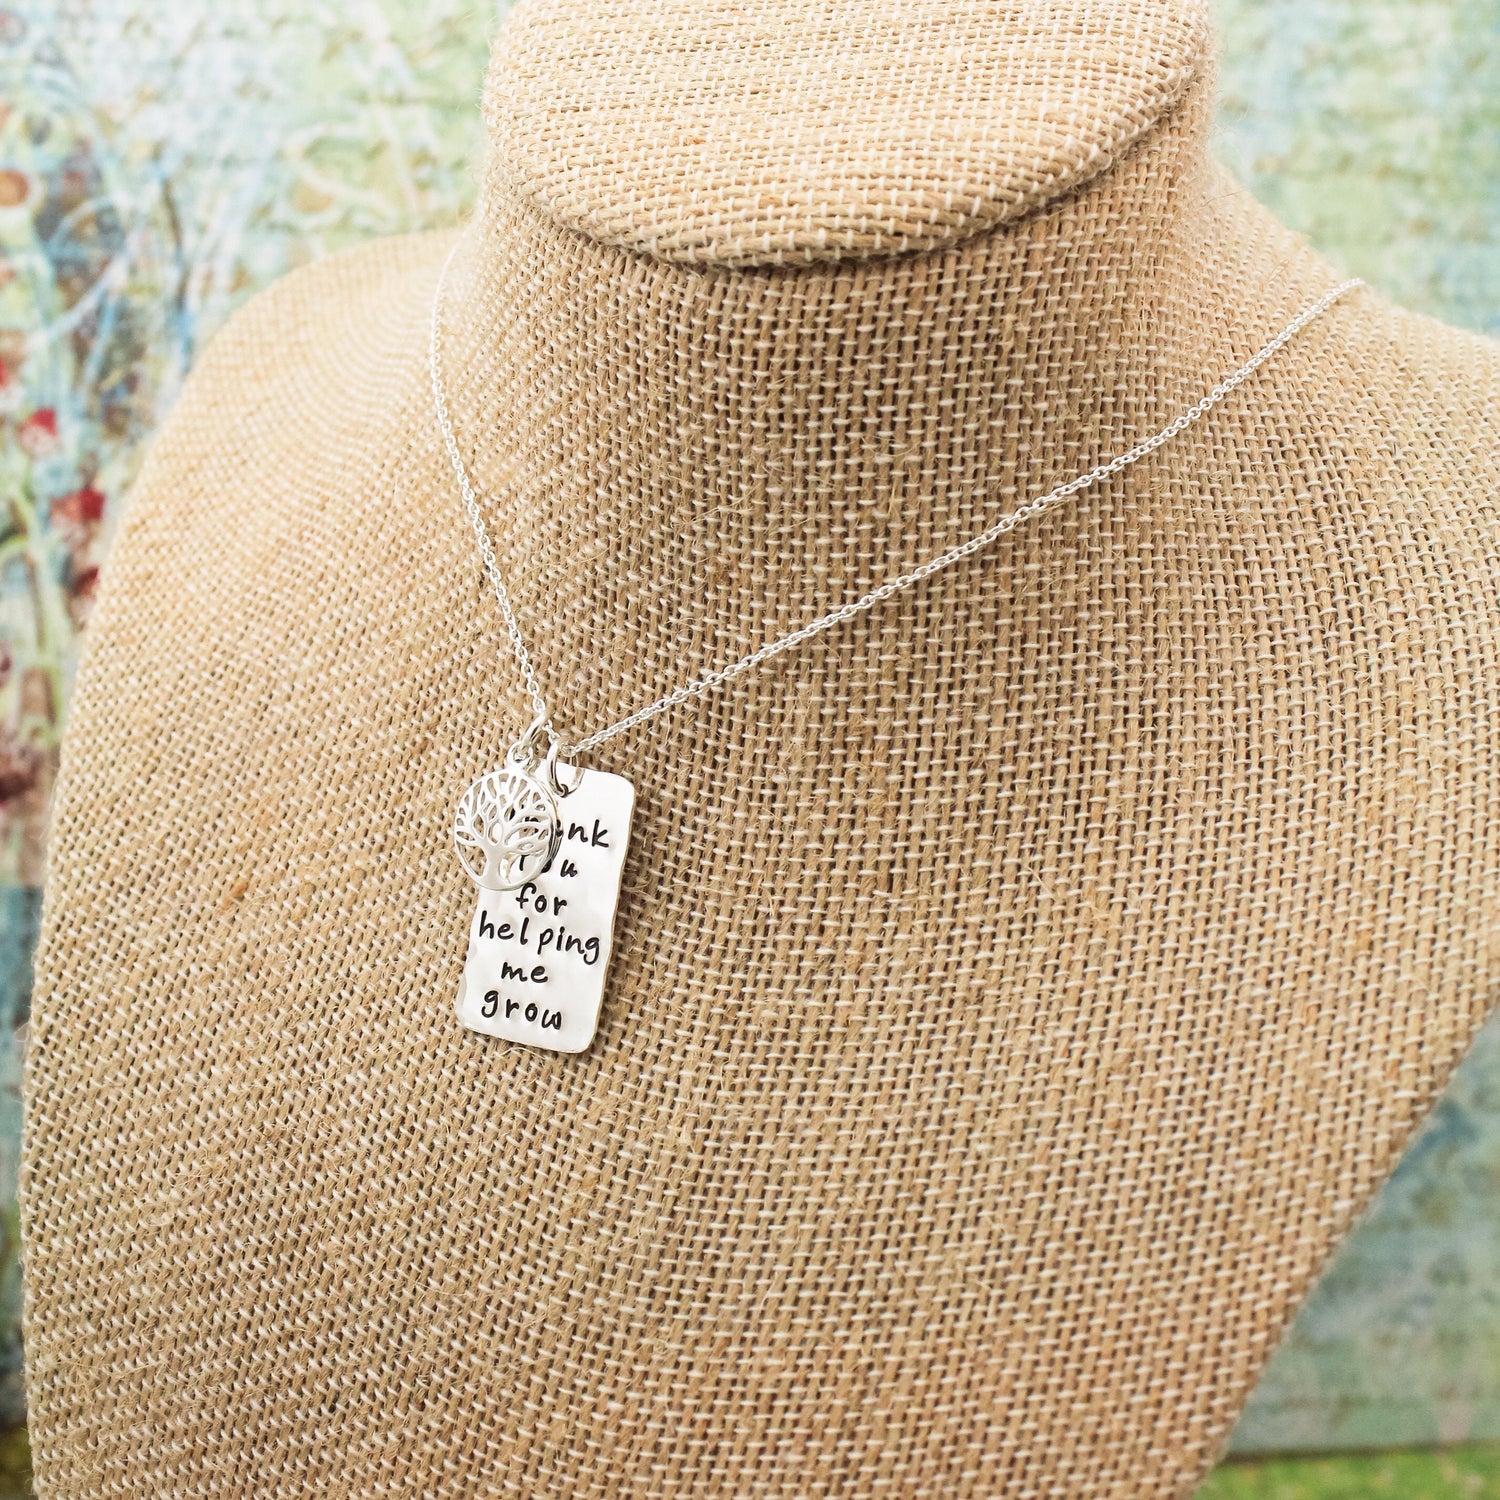 Thank You for Helping Me Grow Teacher Necklace, Tree Teacher Gift, Back to School Gift, Teacher Gifts, Gift for Teacher, Unique Hand Stamped